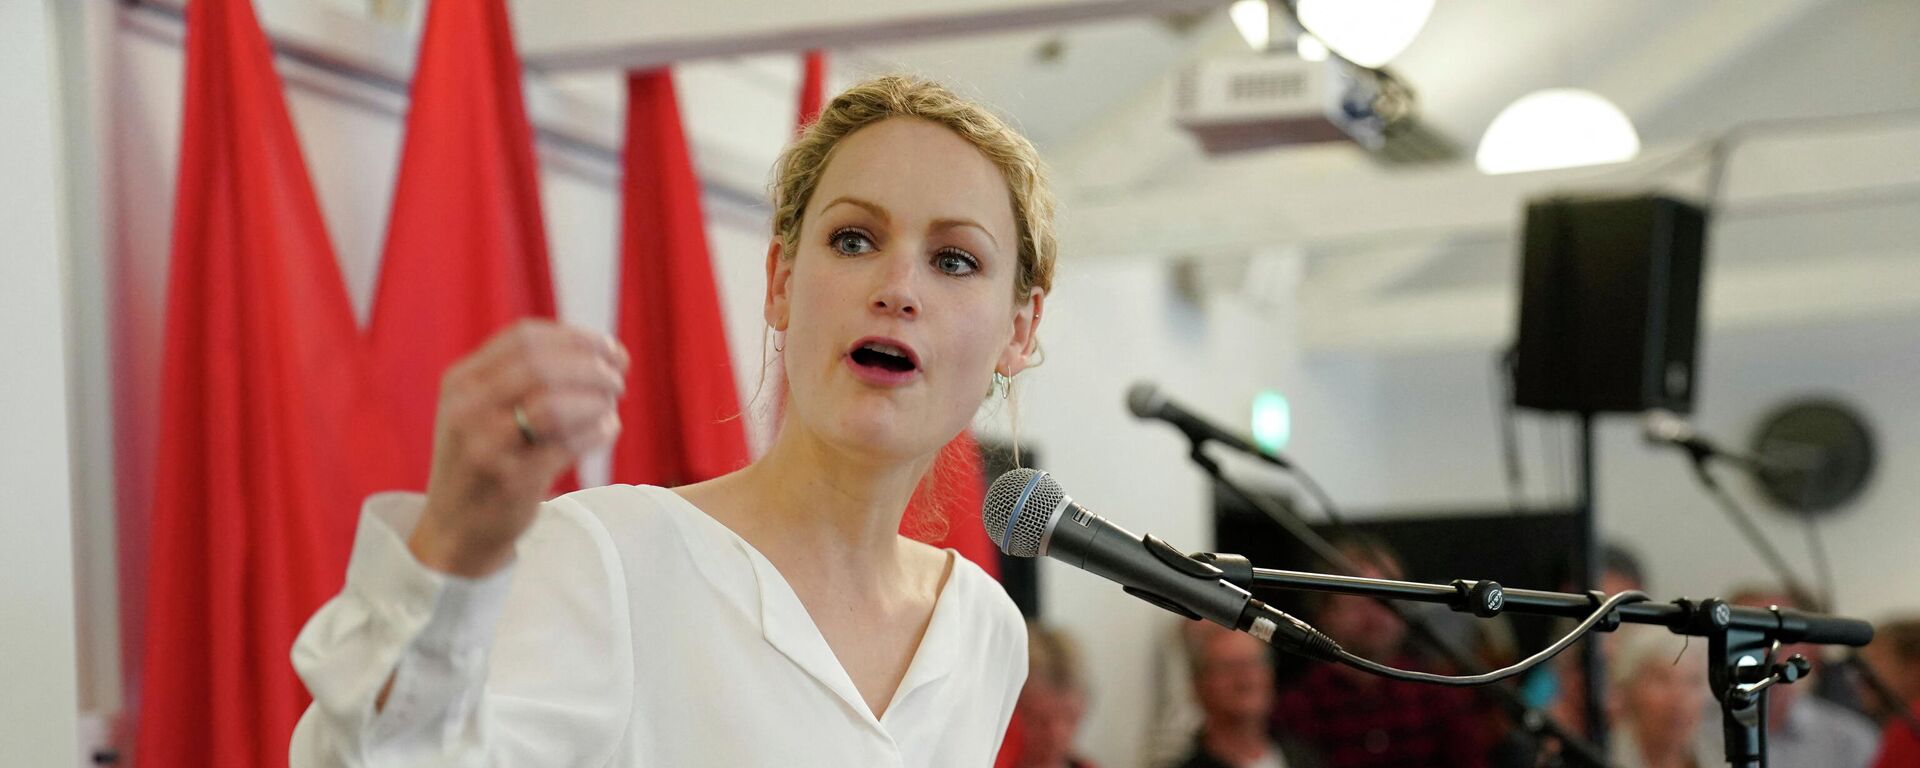 Head of the Red-Green Alliance, Pernille Skipper devilers her speech at a meeting celebrating the International Workers' Day in Amager, Denmark, May 1, 2019 - Sputnik International, 1920, 08.10.2021